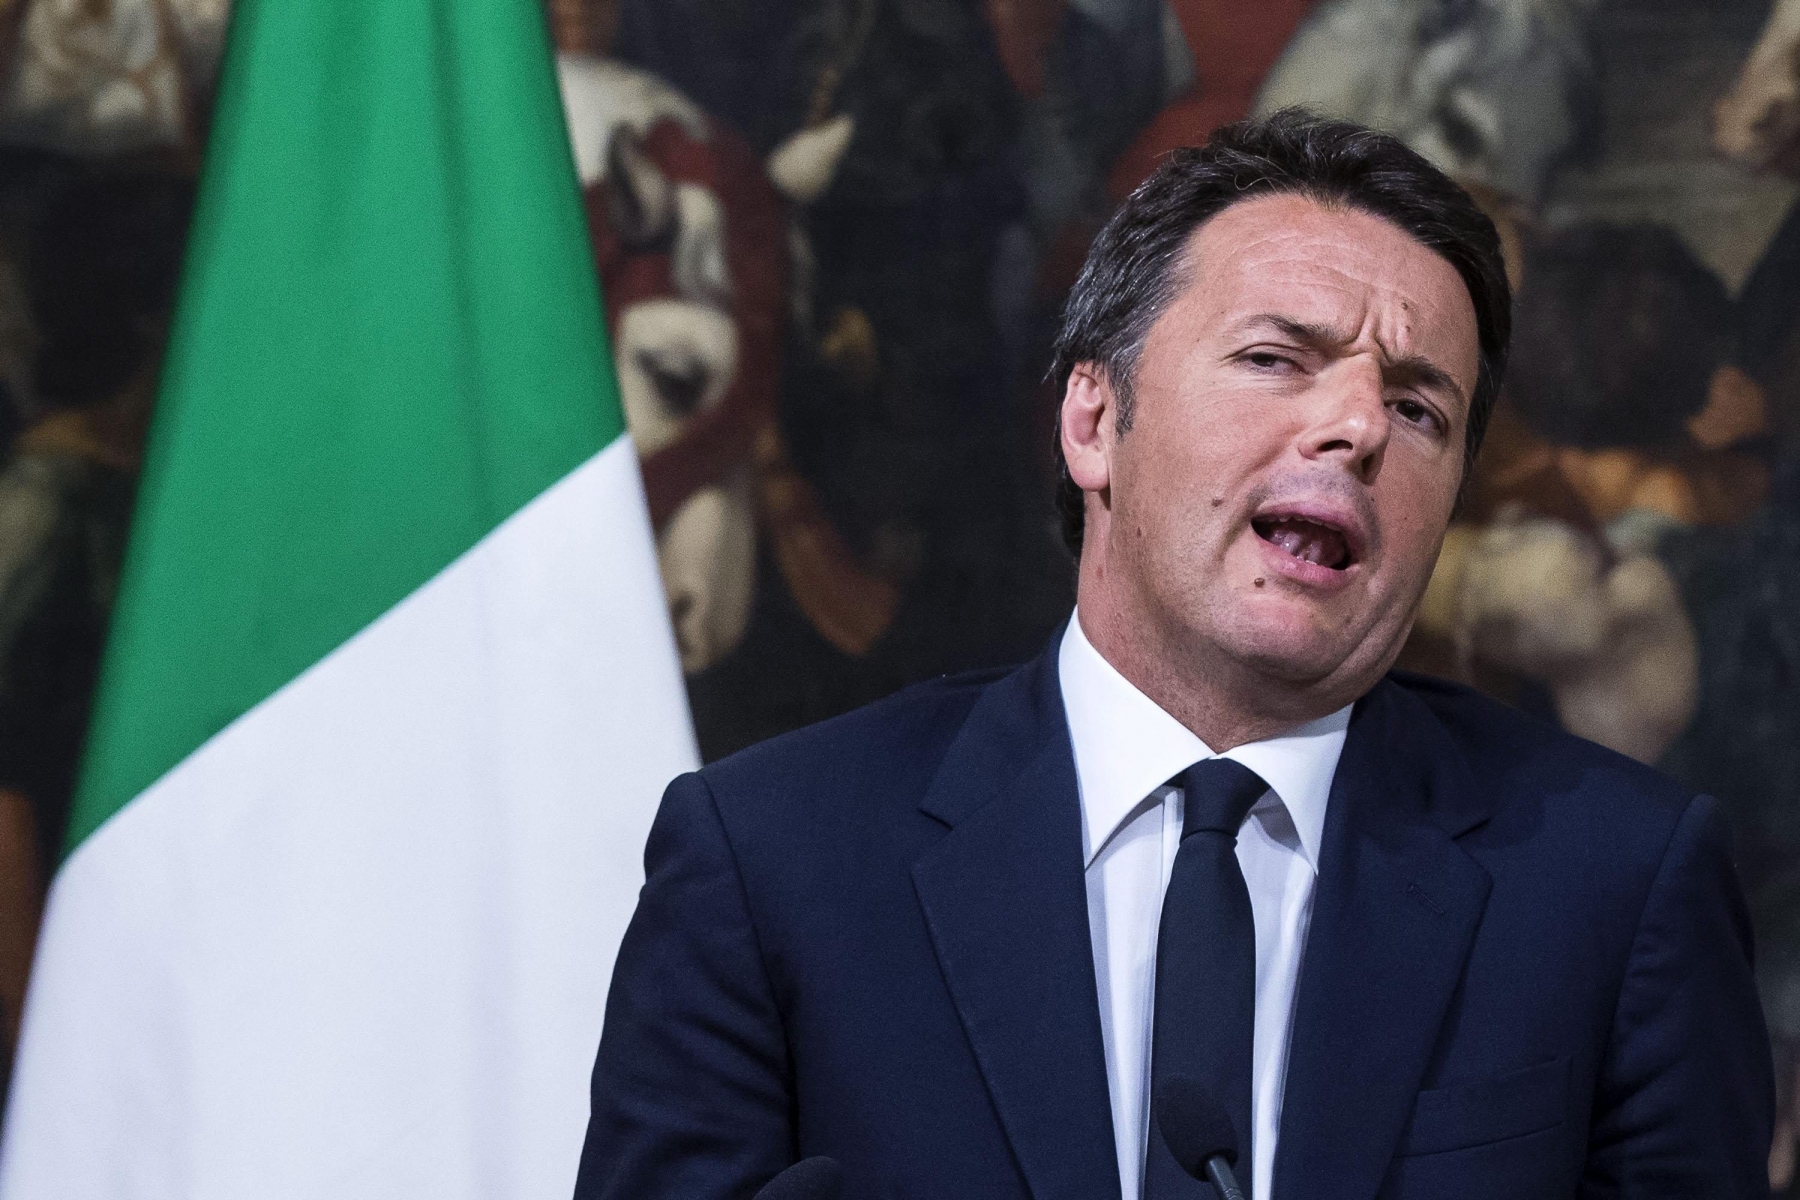 epa05379545 Italian Premier Matteo Renzi attends a press conference at Chigi Palace in Rome, Italy, 20 June 2016, following to mayoral elections.  EPA/ANGELO CARCONI ITALY ELECTIONS